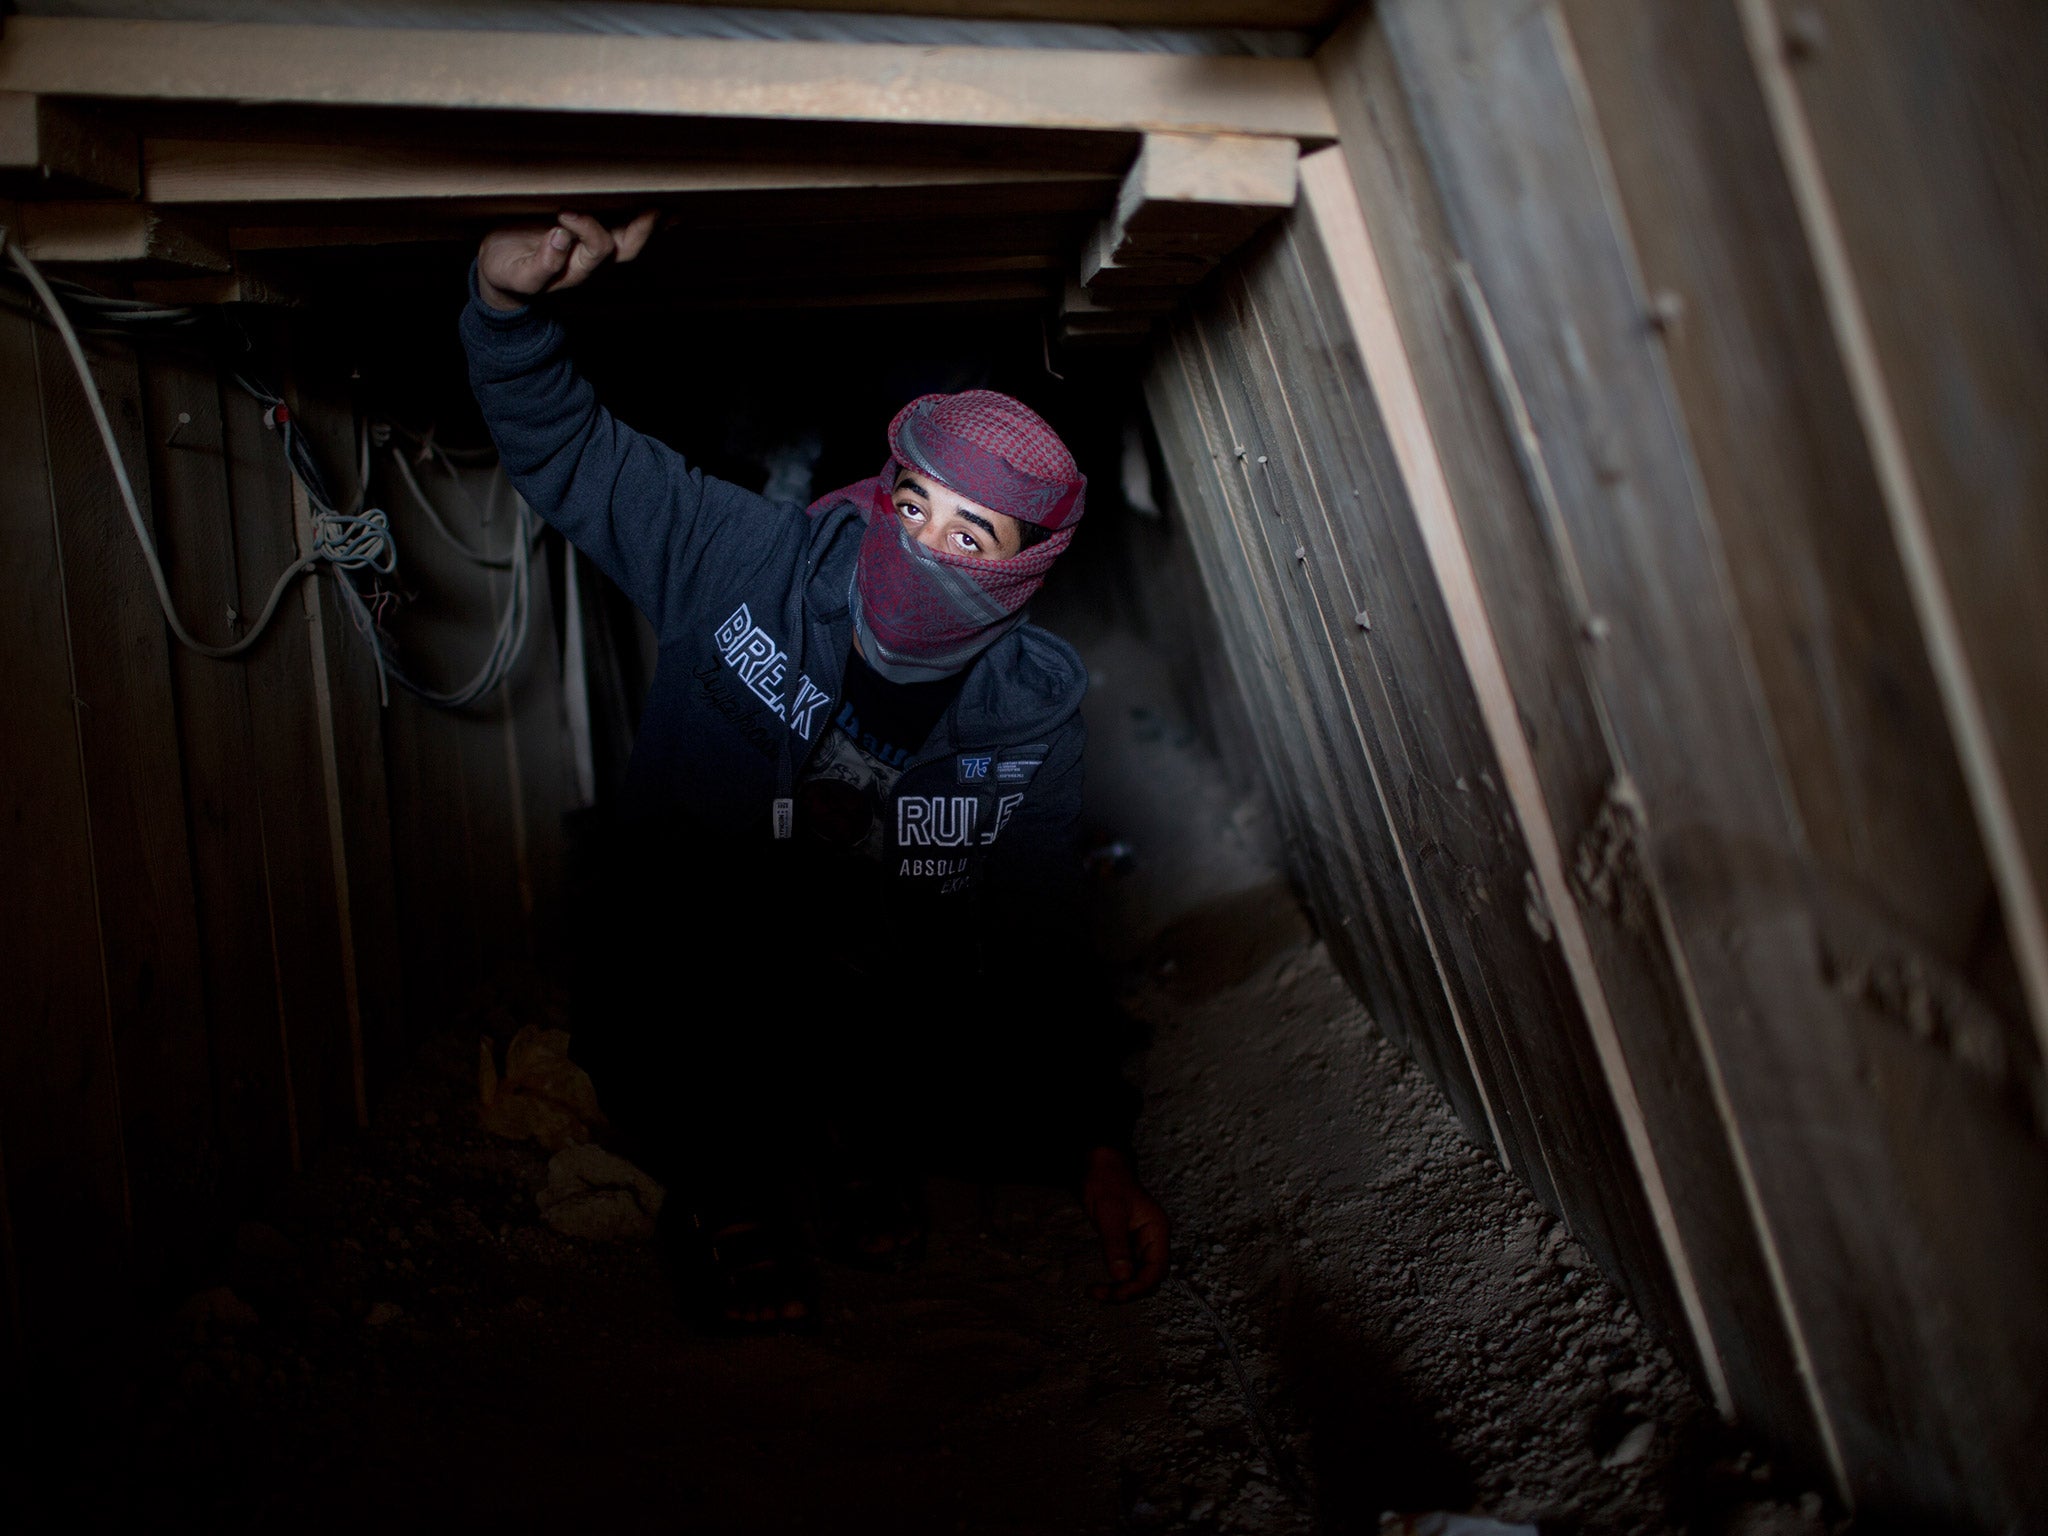 A Palestinian man works inside a smuggling tunnel beneath the Gaza-Egypt border, in Rafah in the southern Gaza Strip, last year